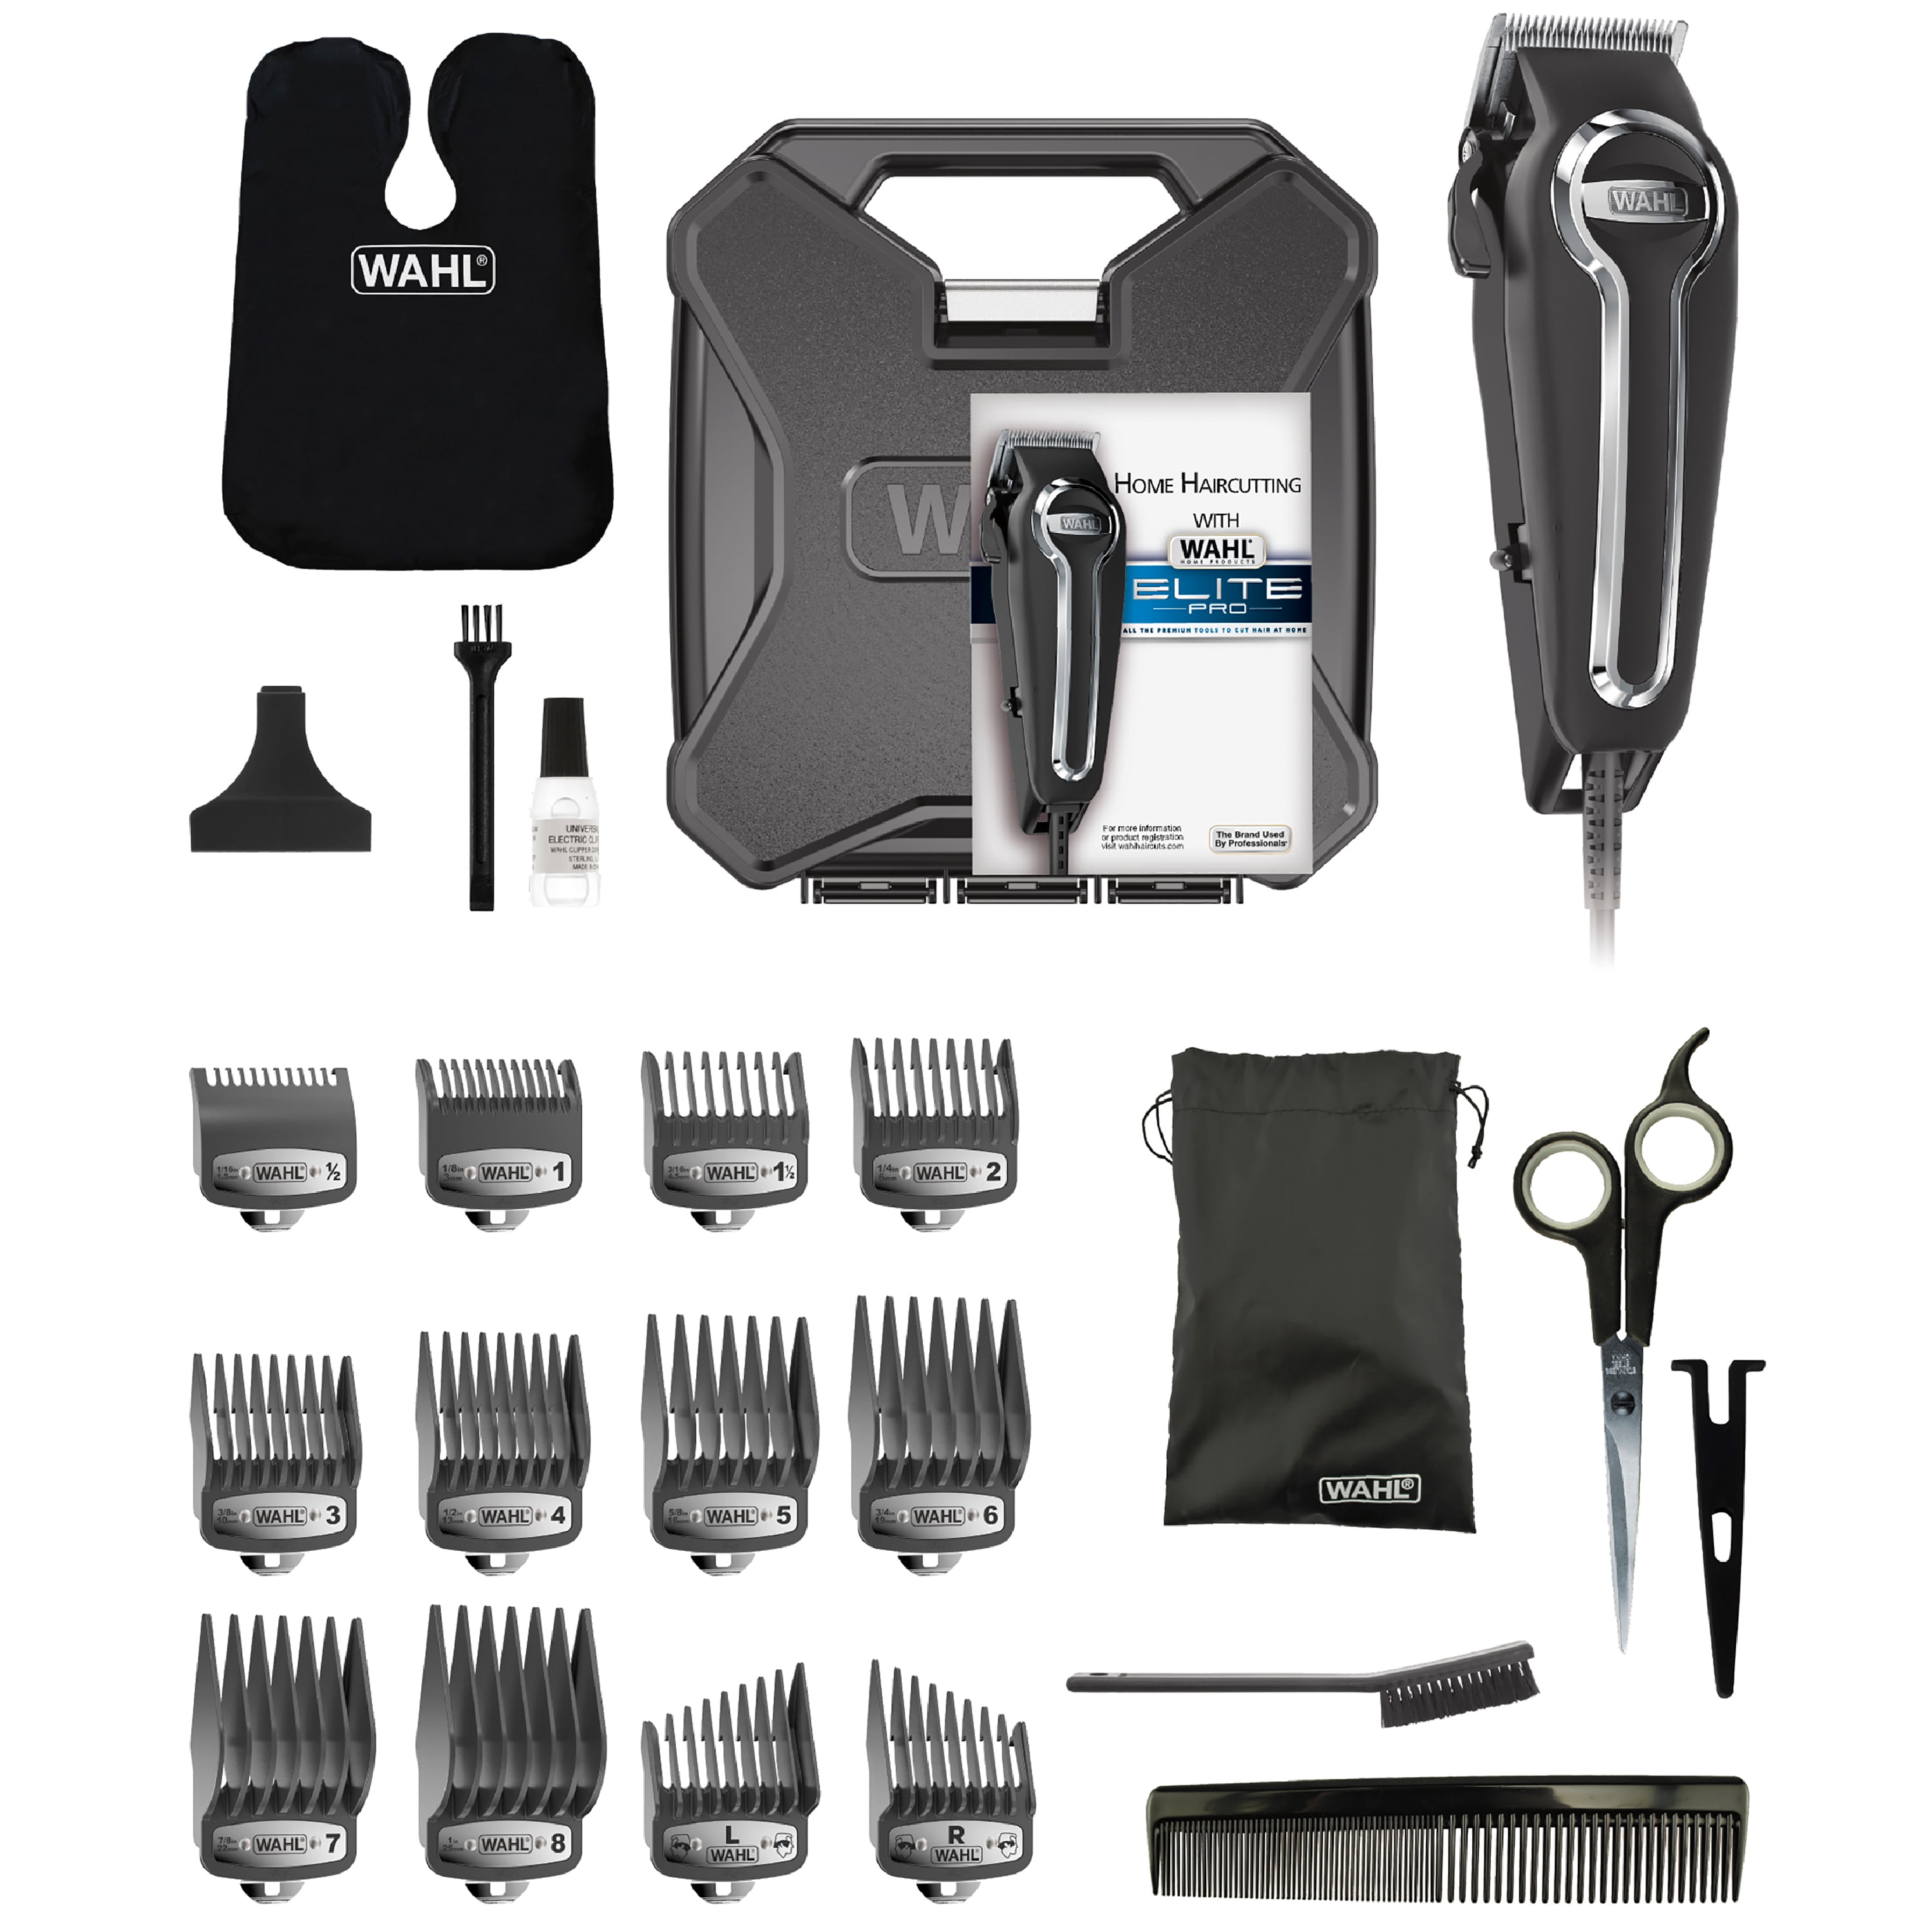 Wahl Elite Professional High Performance Hair Cutting Kit, 23 Piece Set  with Clipper, Clipper-Blade Cover, Premium Styling Hair-Comb, 79734 -  Walmart.com